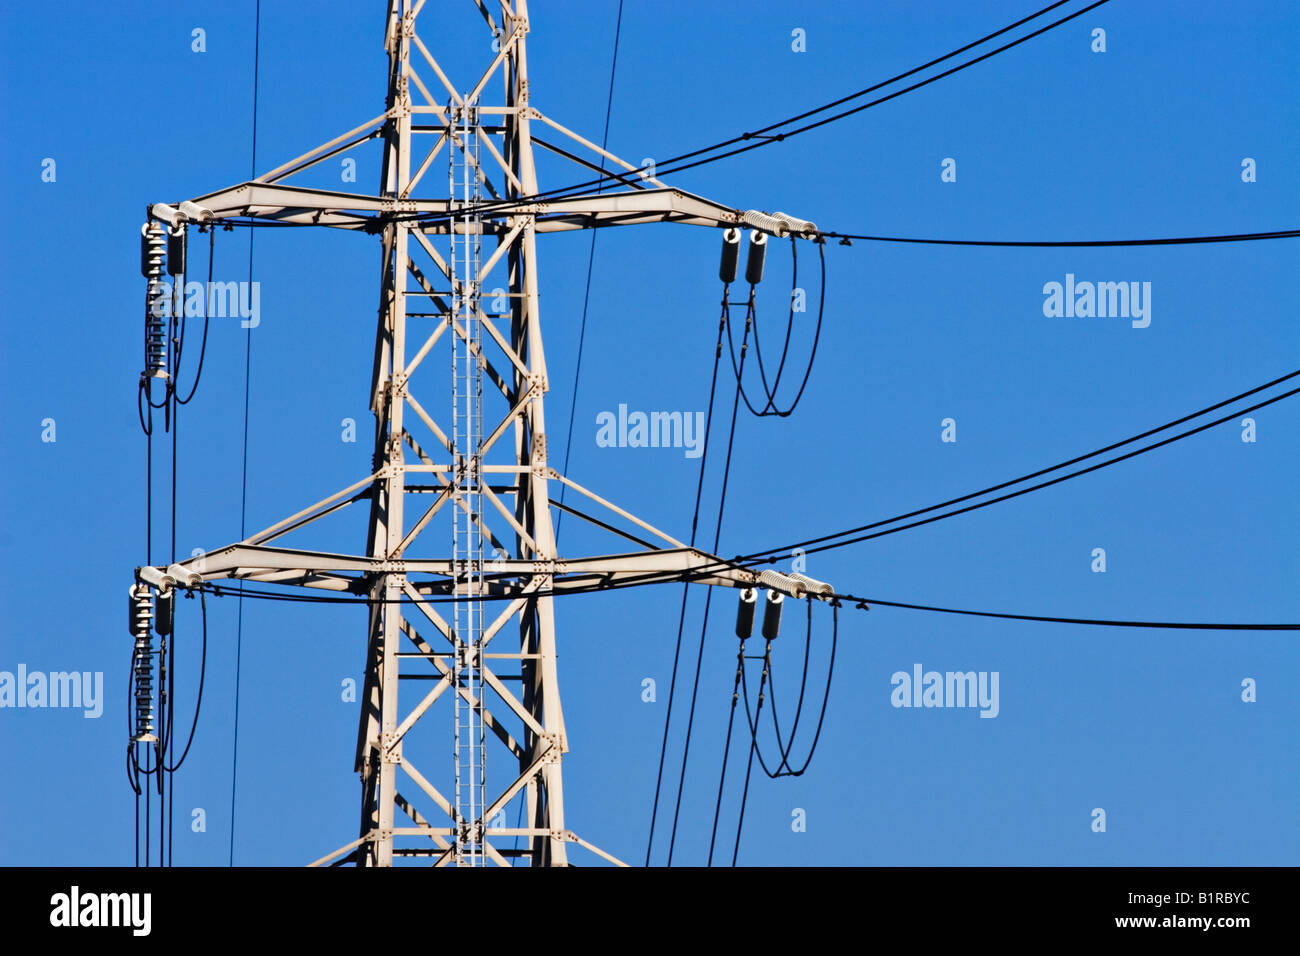 Energy Industry / Electricity. A High Voltage Transmission Tower and Power Lines. Stock Photo